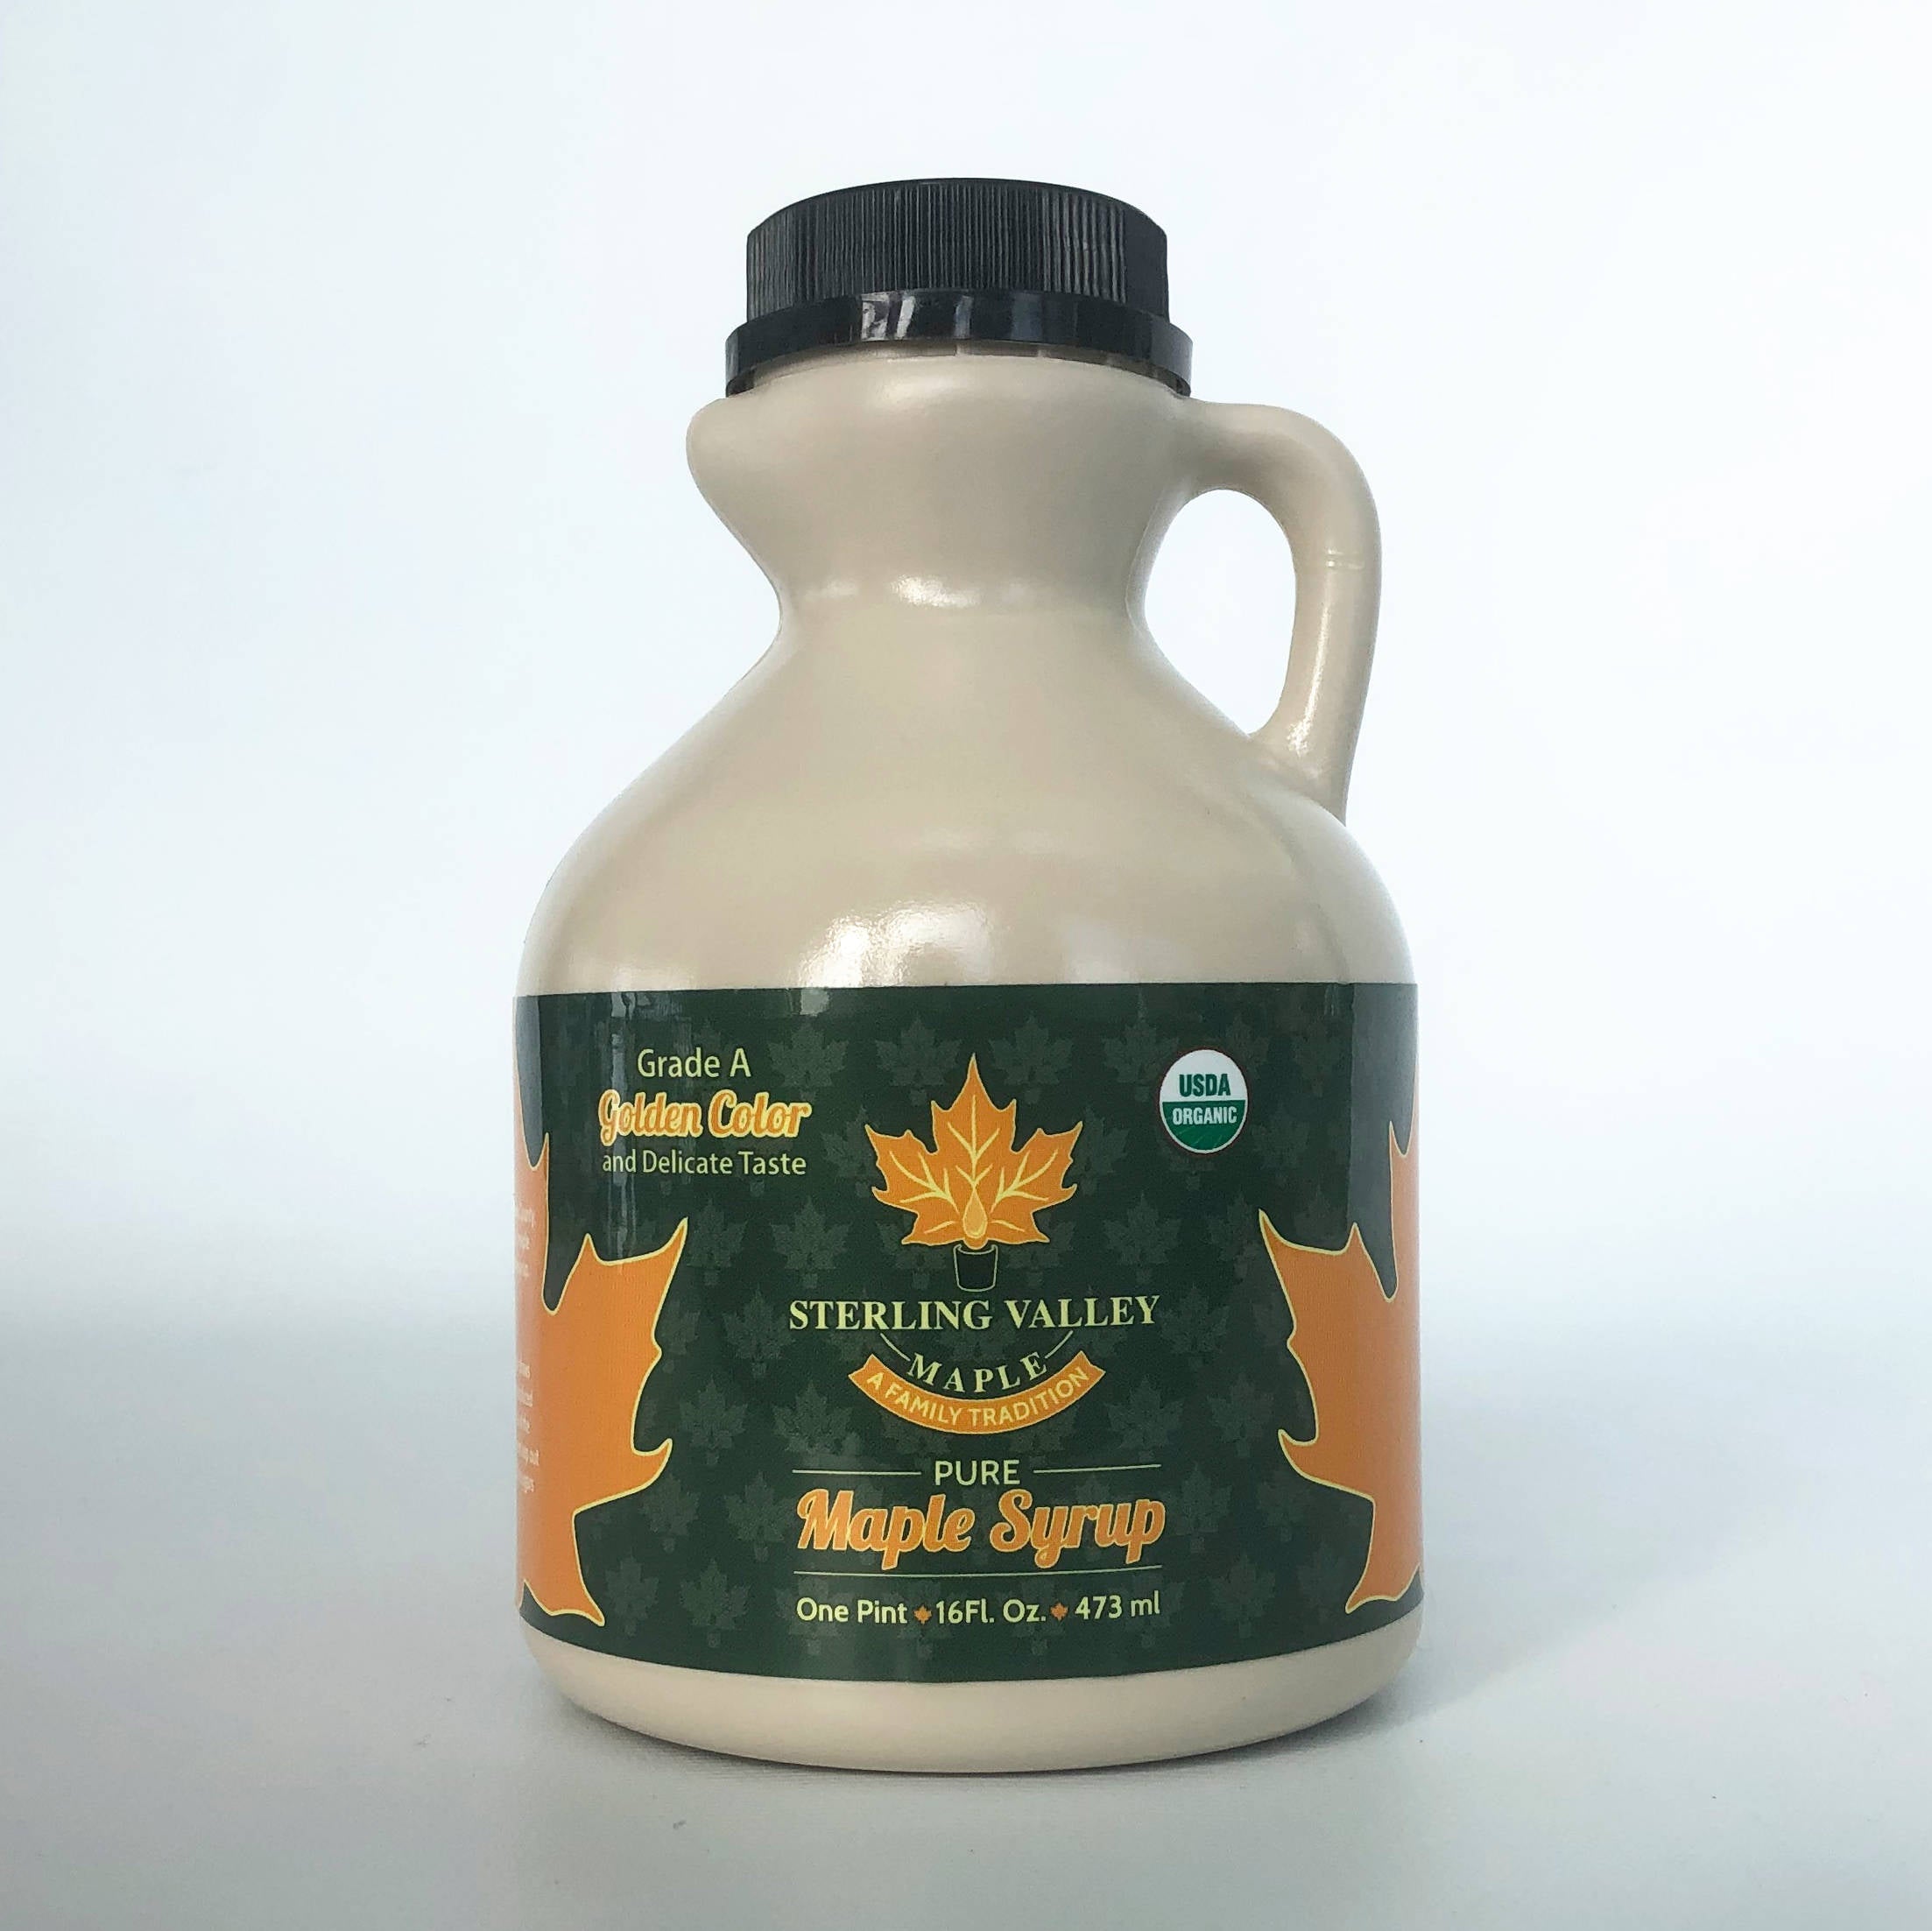 Certified Organic Maple Syrup:  Golden Color with Delicate Taste